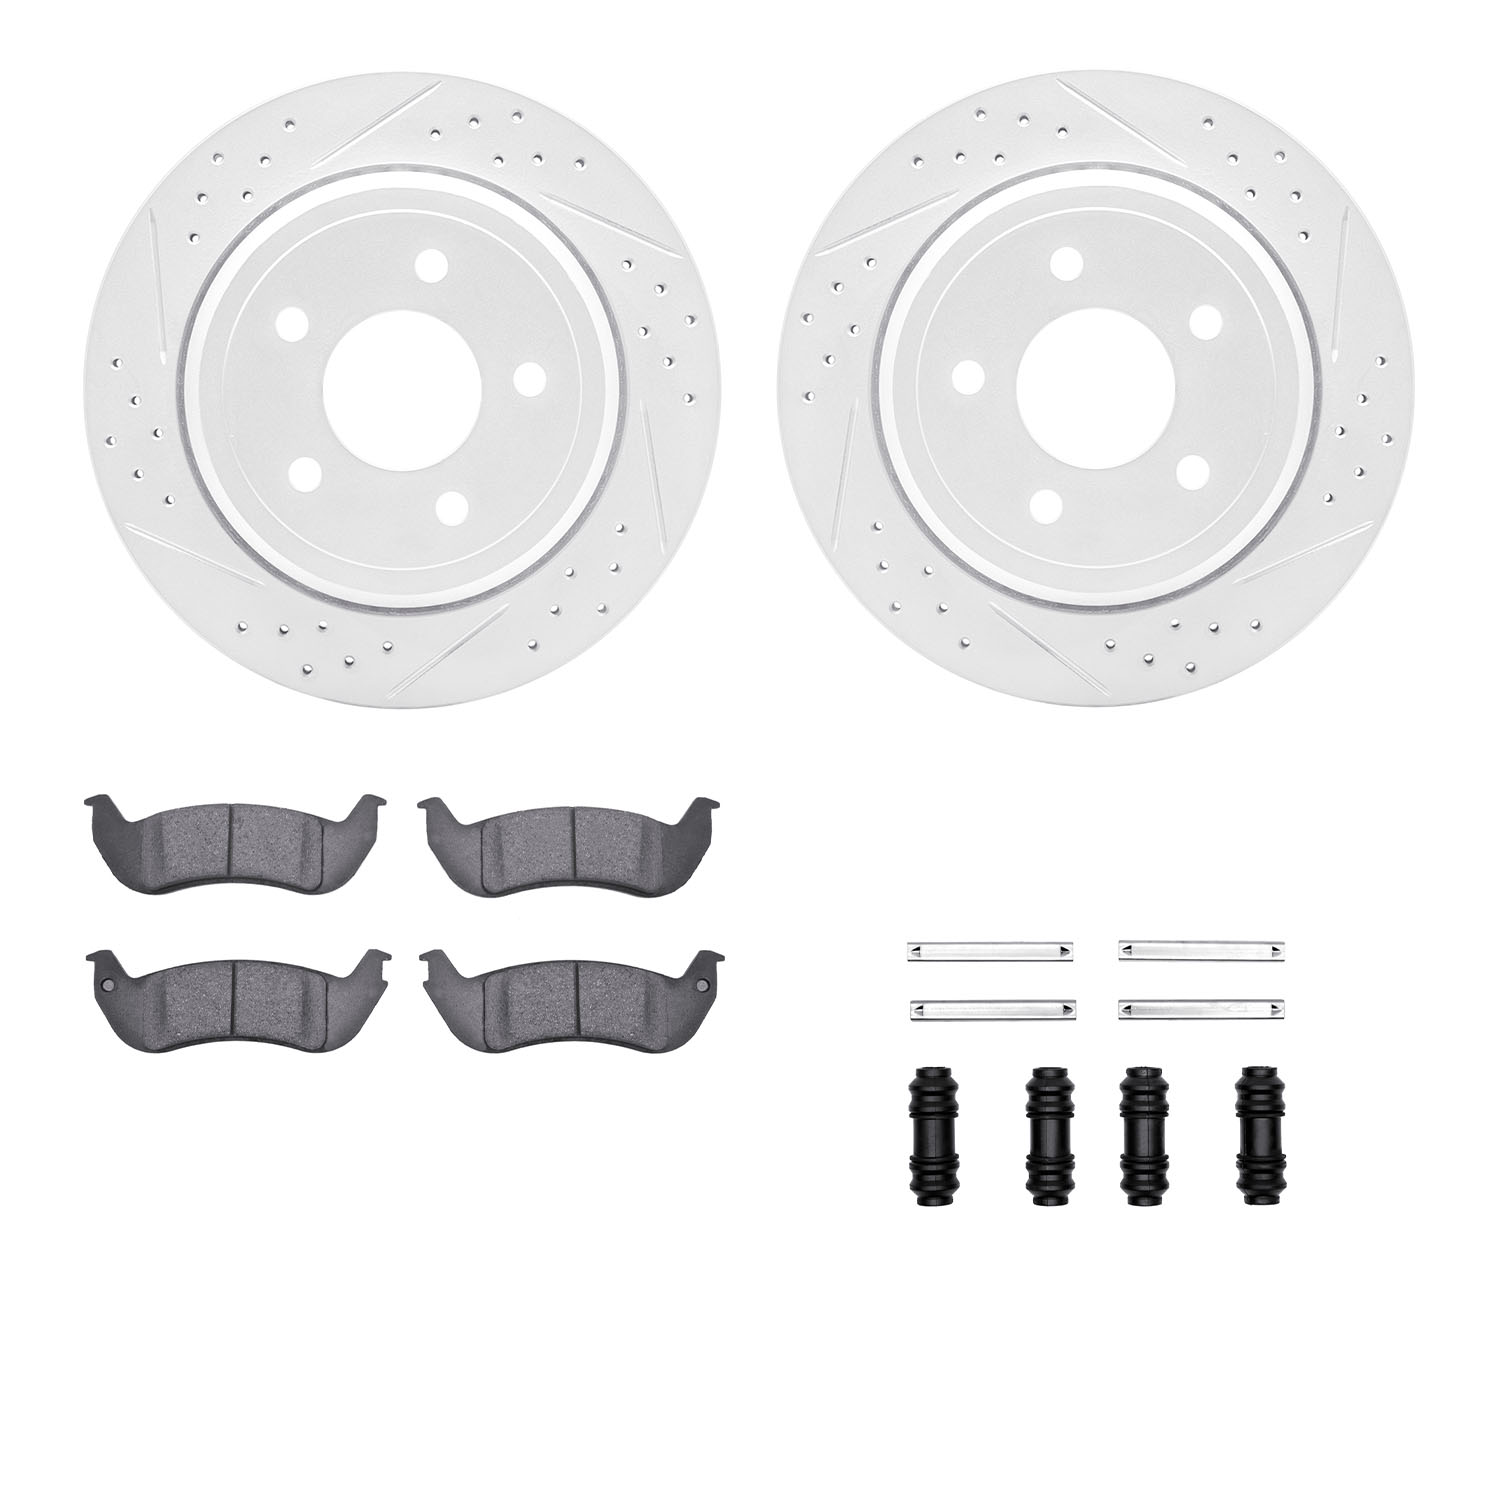 2212-56001 Geoperformance Drilled/Slotted Rotors w/Heavy-Duty Pads Kit & Hardware, 2003-2011 Ford/Lincoln/Mercury/Mazda, Positio